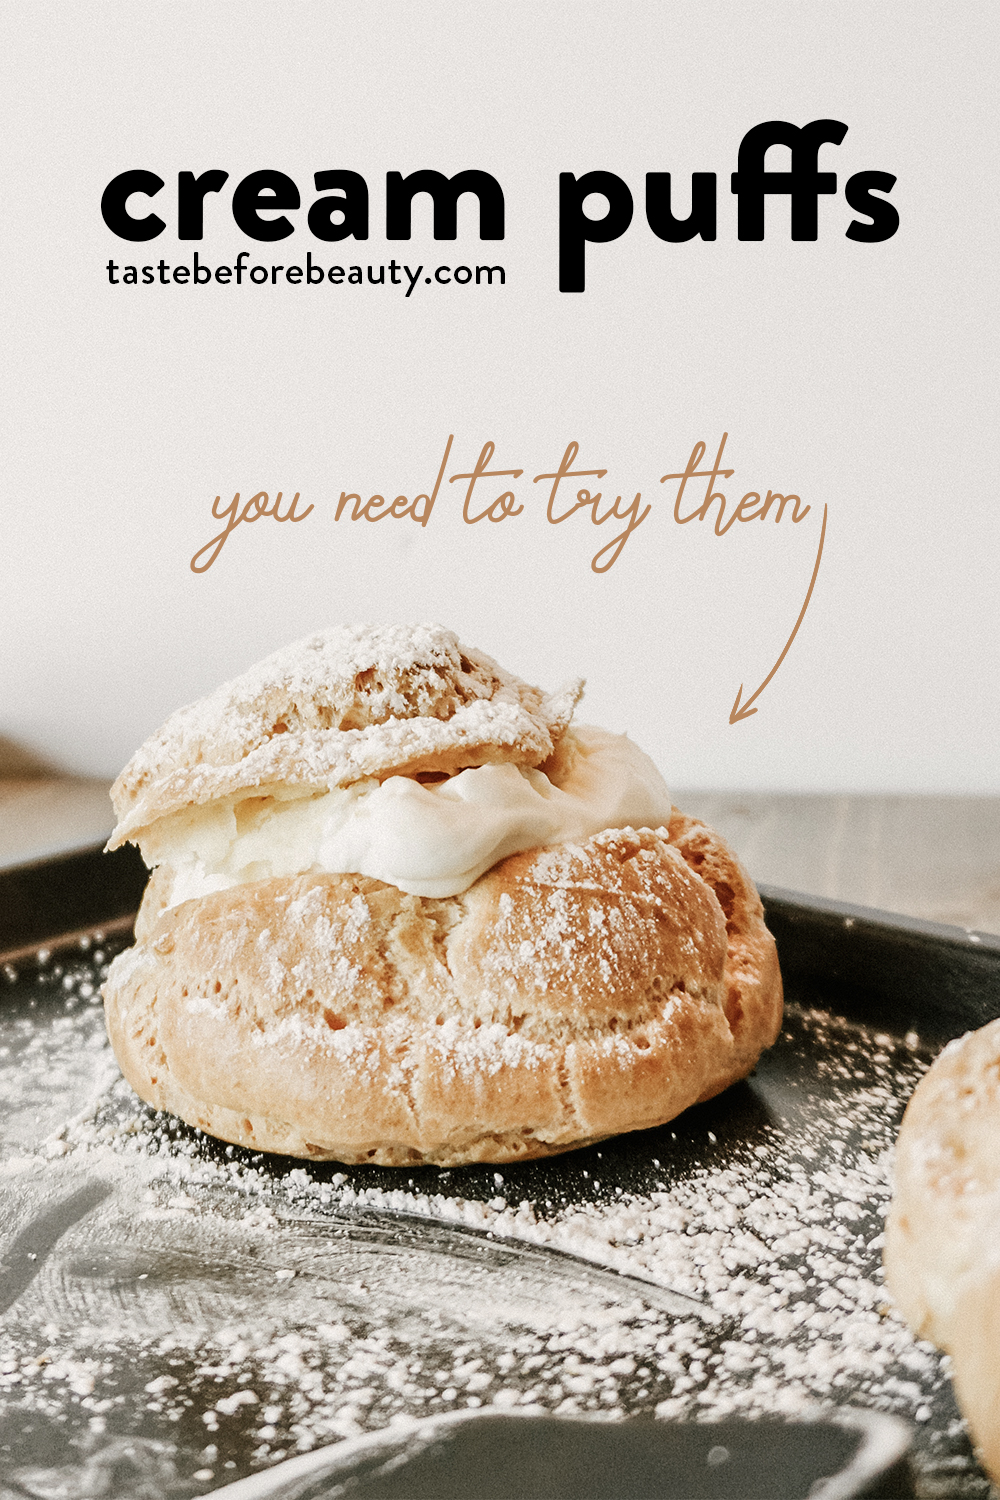 taste before beauty cream puff with powdered sugar on top on a pan